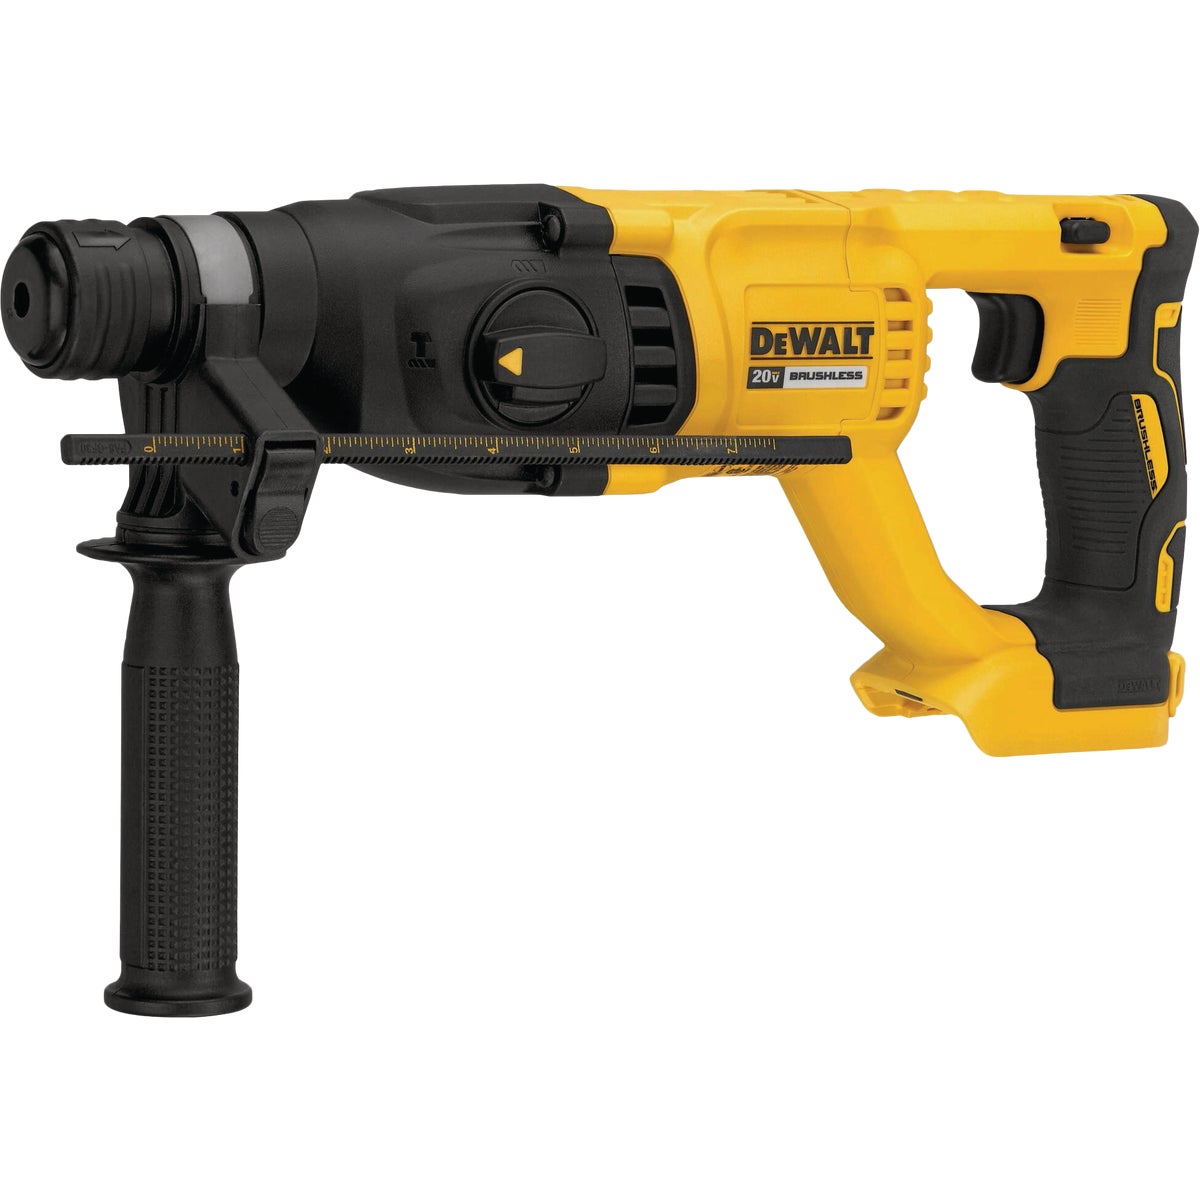 DEWALT 20V MAX XR 1 In. SDS Plus Brushless Cordless Rotary Hammer Drill (Tool Only)